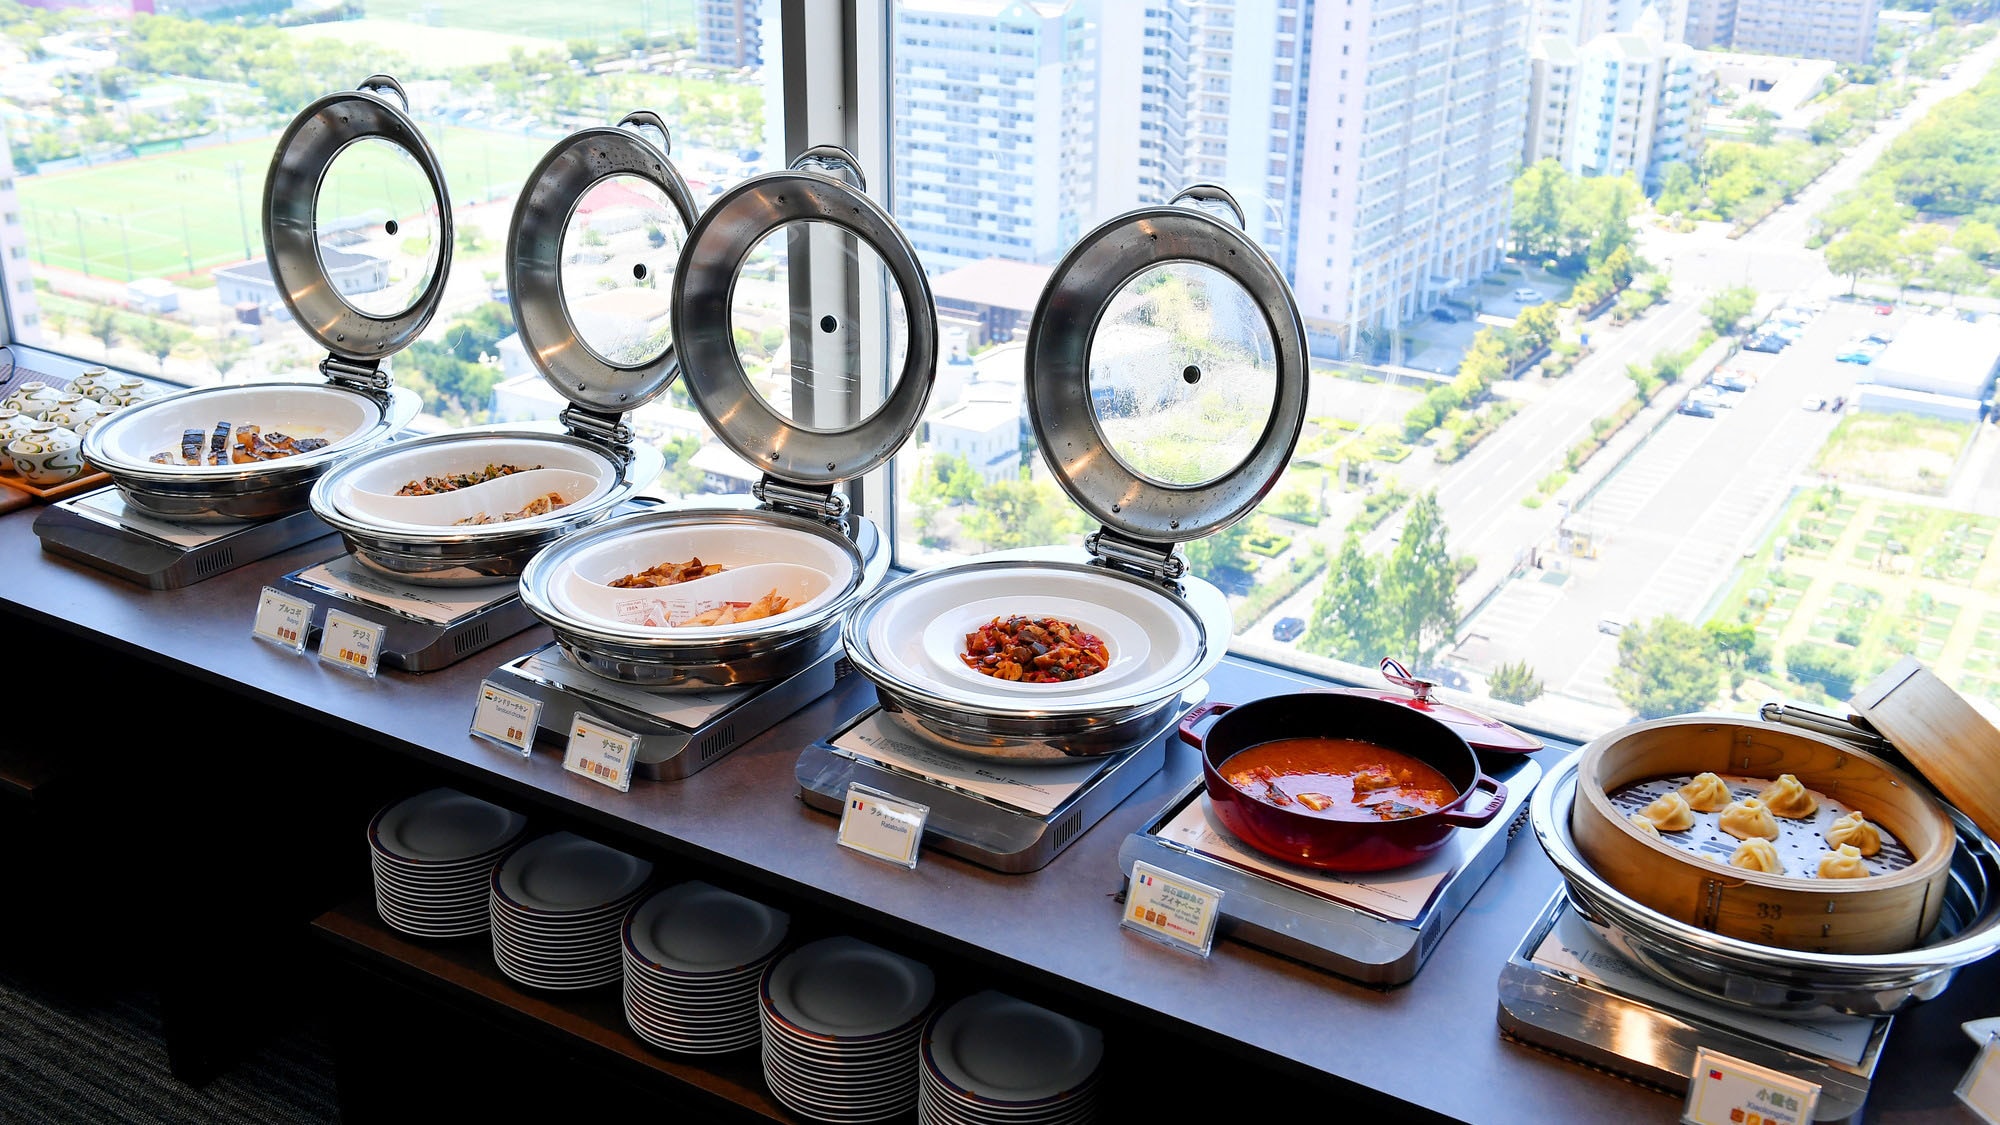 [Breakfast in the world] Selectable breakfast and brunch buffet in the world